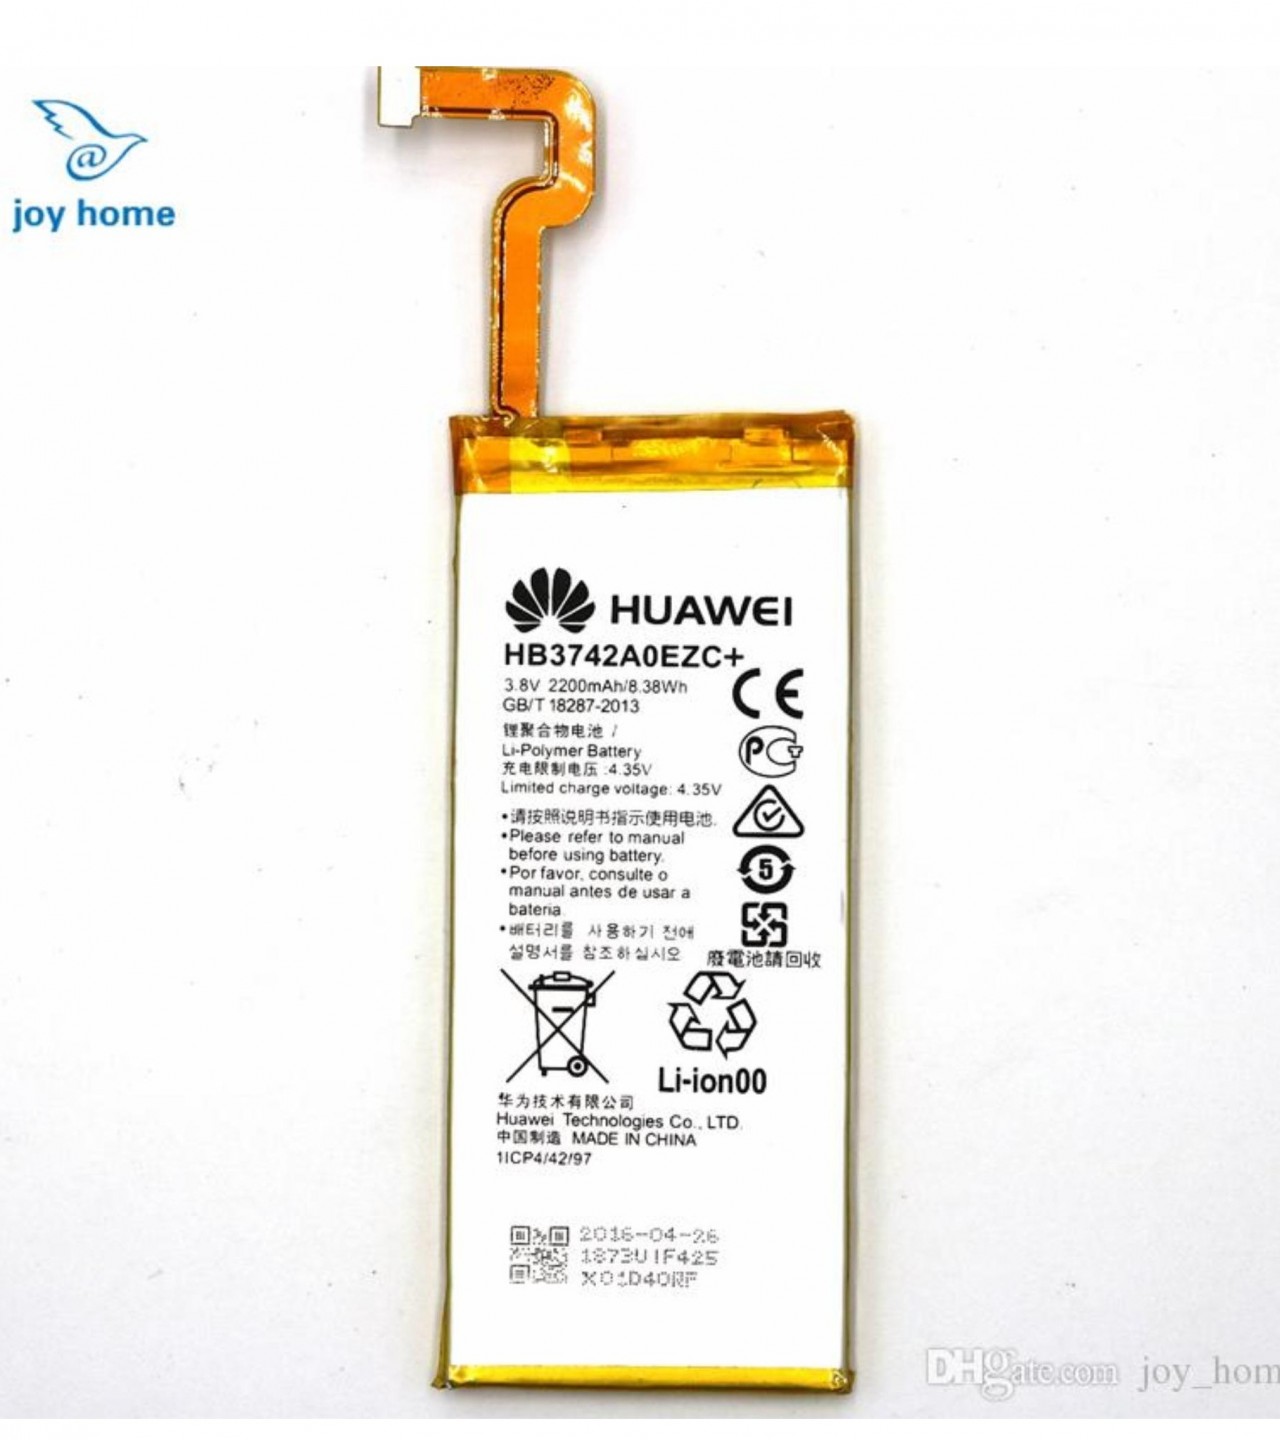 Huawei HB3742A0EZC Battery Replacement For Huawei P8 Lite with  2200 mAh Capacity _ Silver